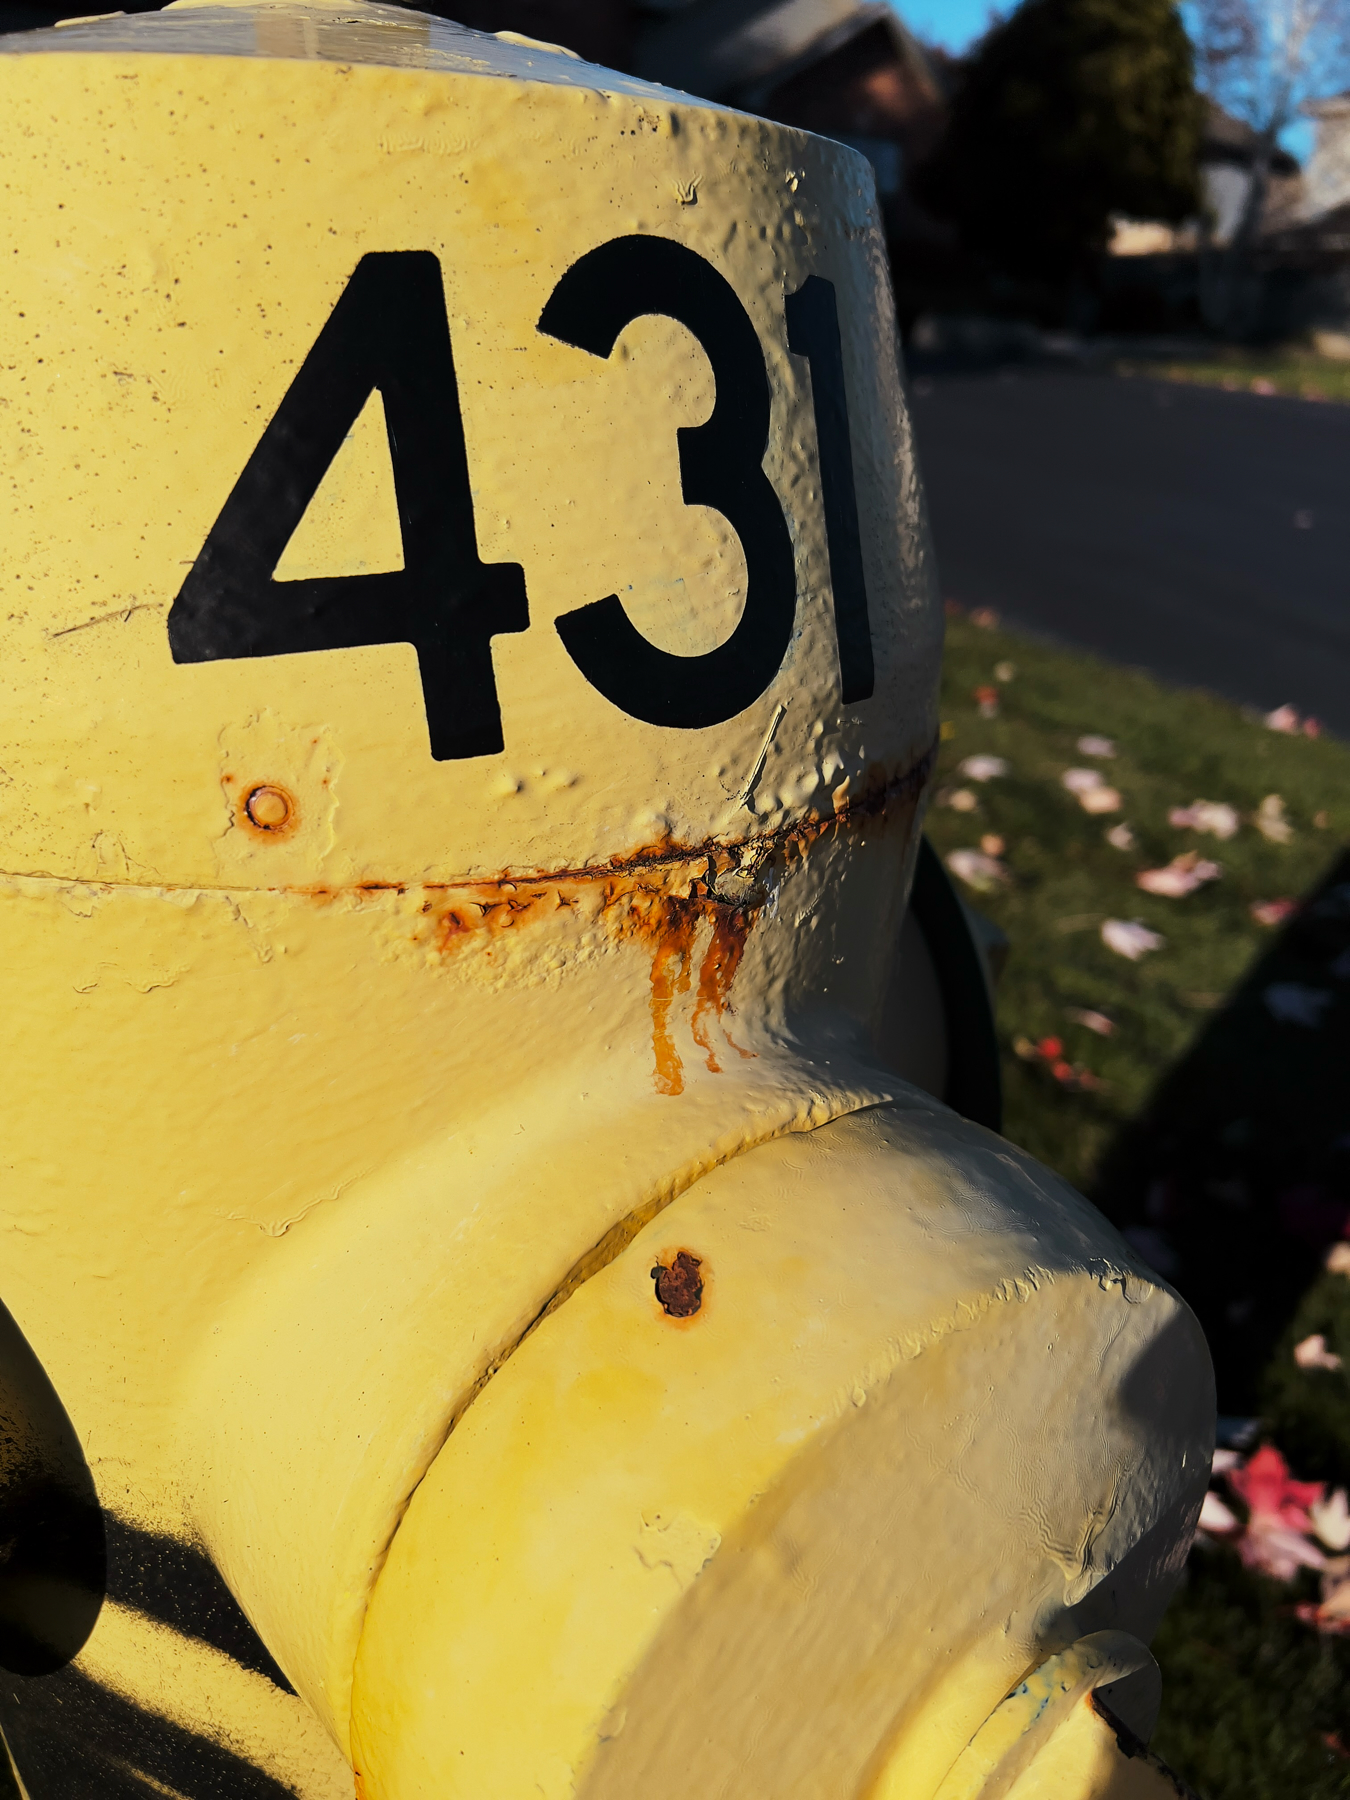 Macro shot of a banana yellow coloured fire hydrant, with the number 431 in black along the top. Just below the number is an orange-brown patch of rust that has eaten through the paint. The right hand side of the hydrant has a shadow cast over it. Behind it and to the right are the blurred silhouettes of a house, driveway, and vibrant green grass dotted with fallen leaves of various colours.